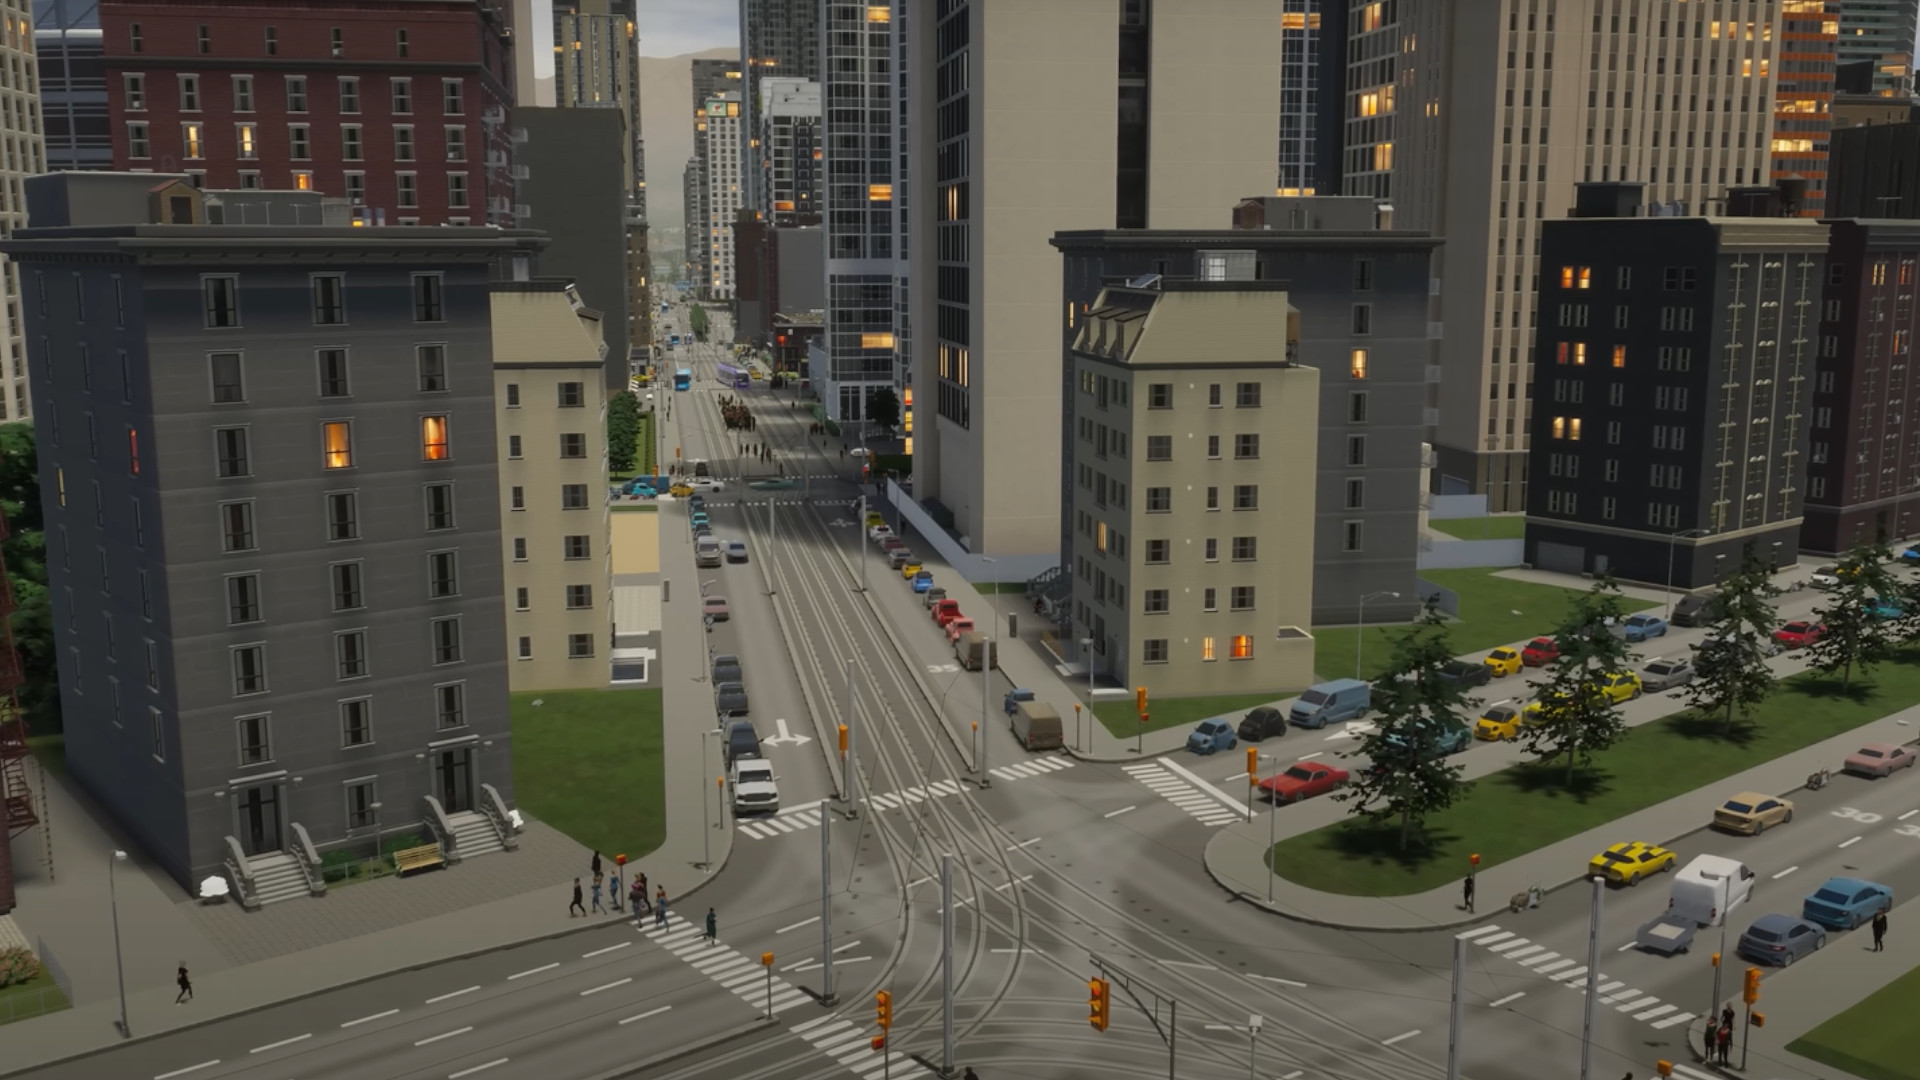  Cities: Skylines 2 has no cap on the number of people it can track, and it's basically the Matrix 